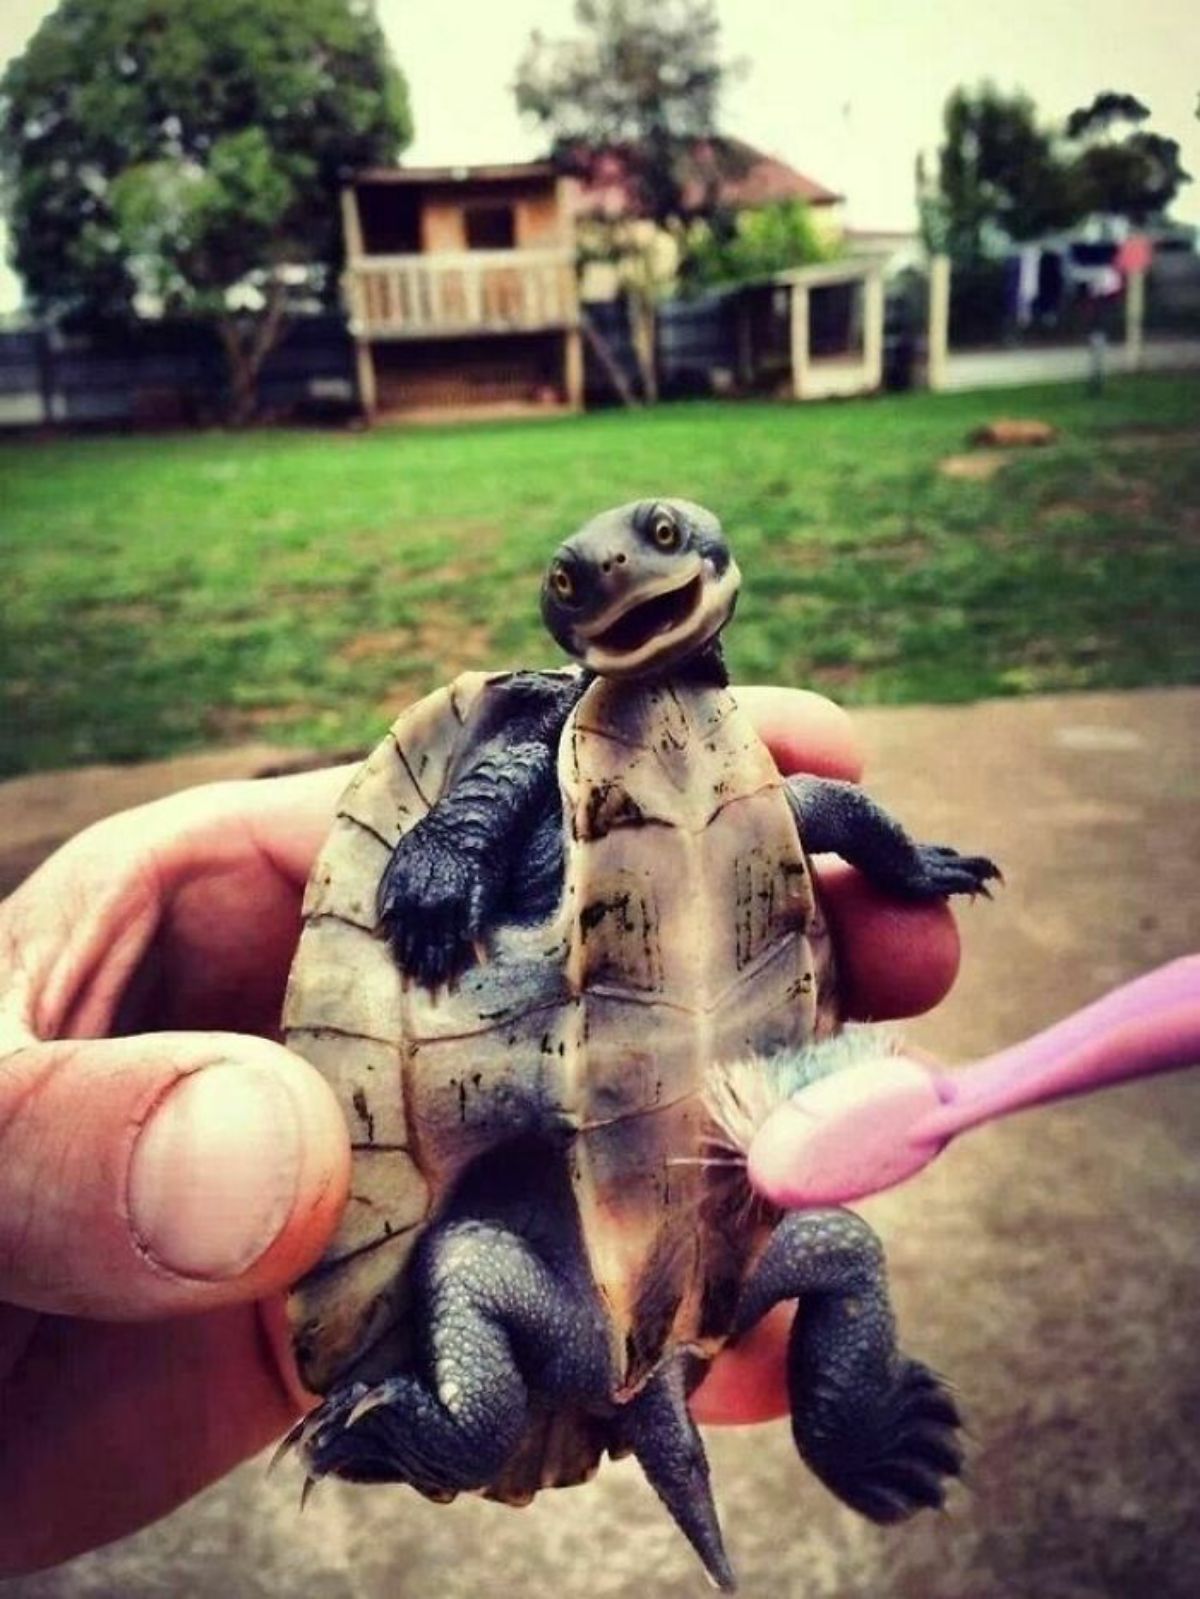 turtle getting held up and having its stomach brushed with a toothbrush